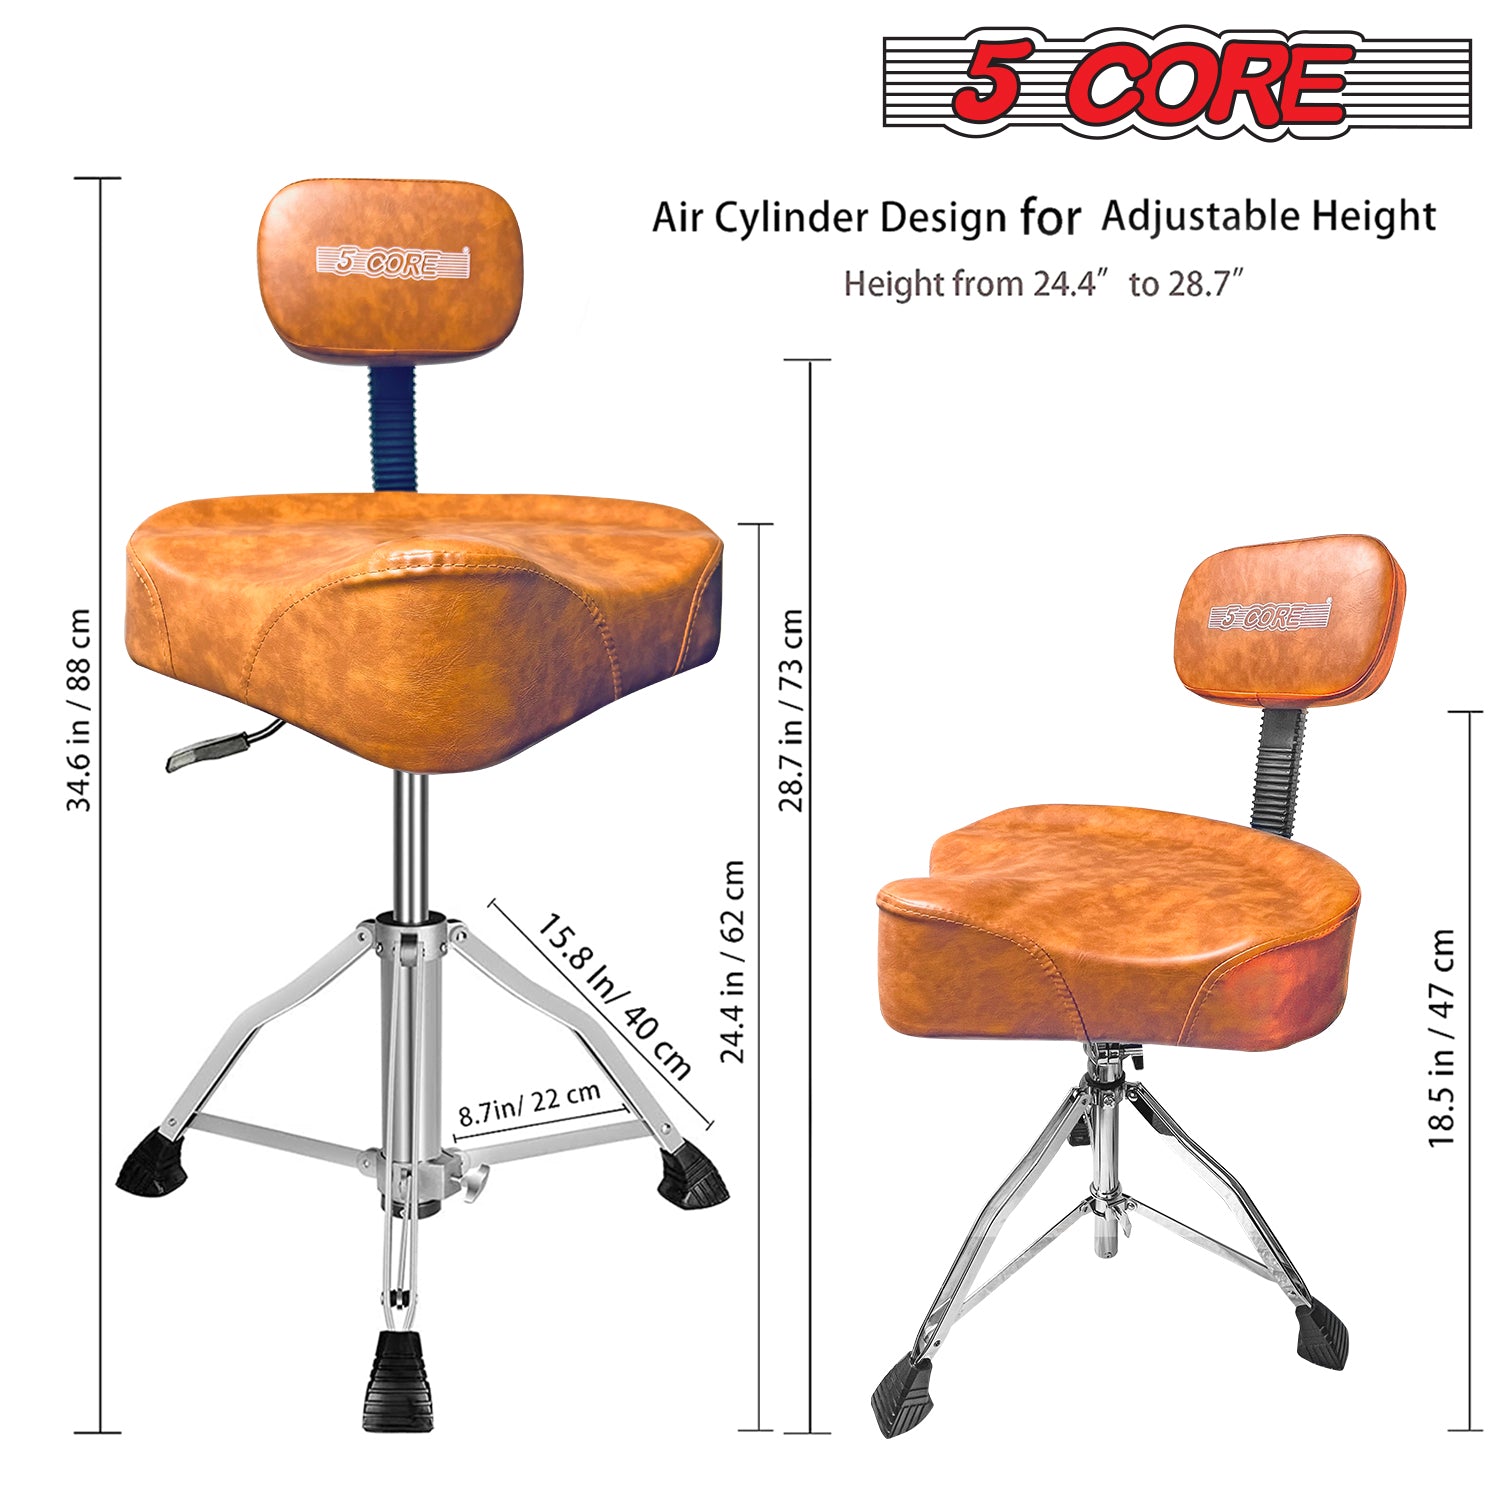 Upgrade Your Drumming Setup with 5 Core's Drum Throne Back Rest-LVR